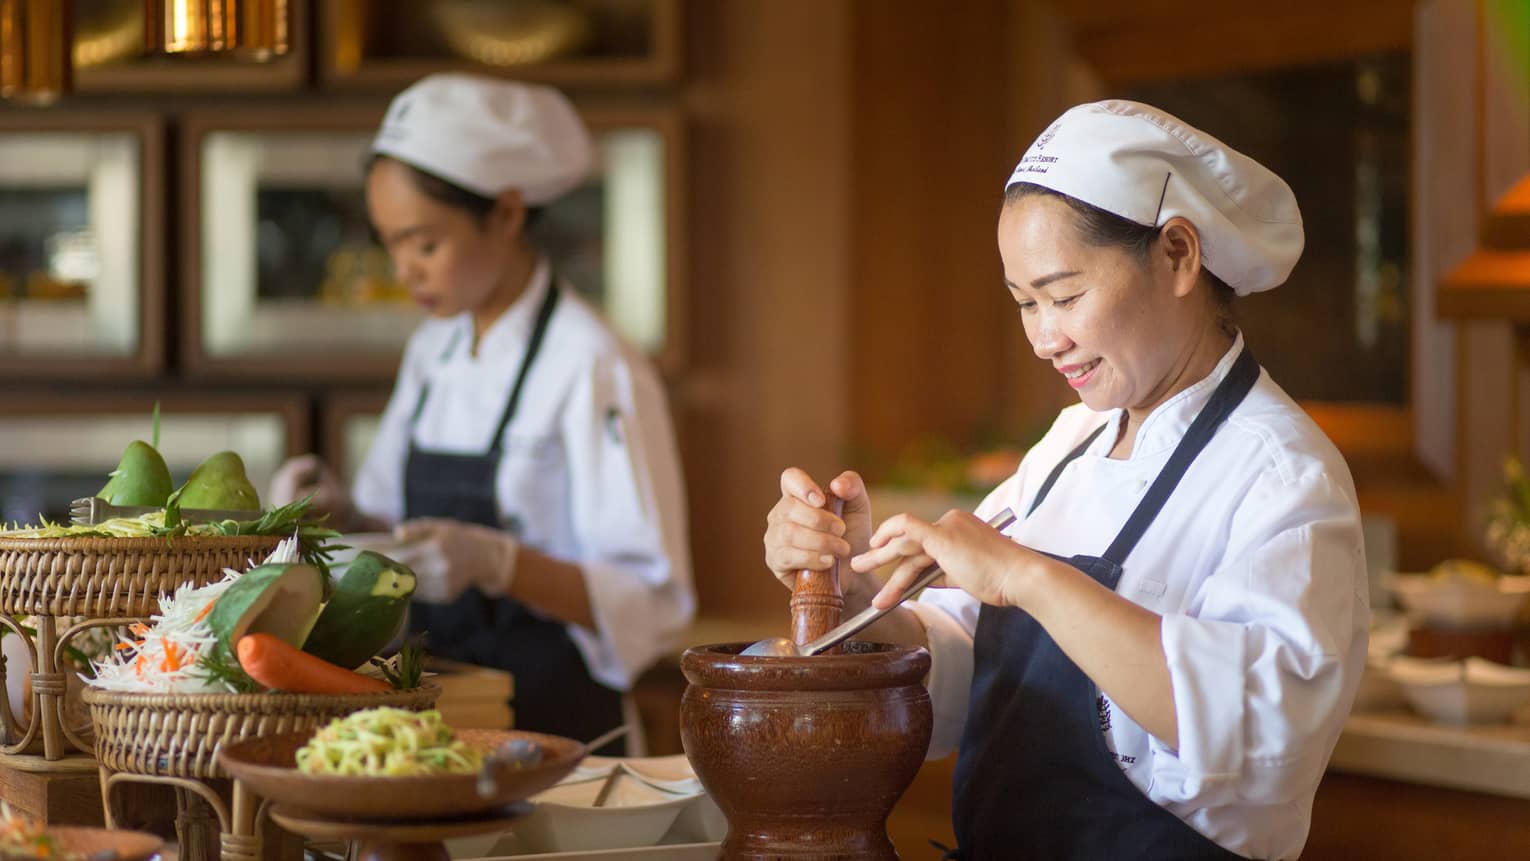 Two chefs in uniform prepare authentic Thai cuisine dishes at counter with fresh vegetables